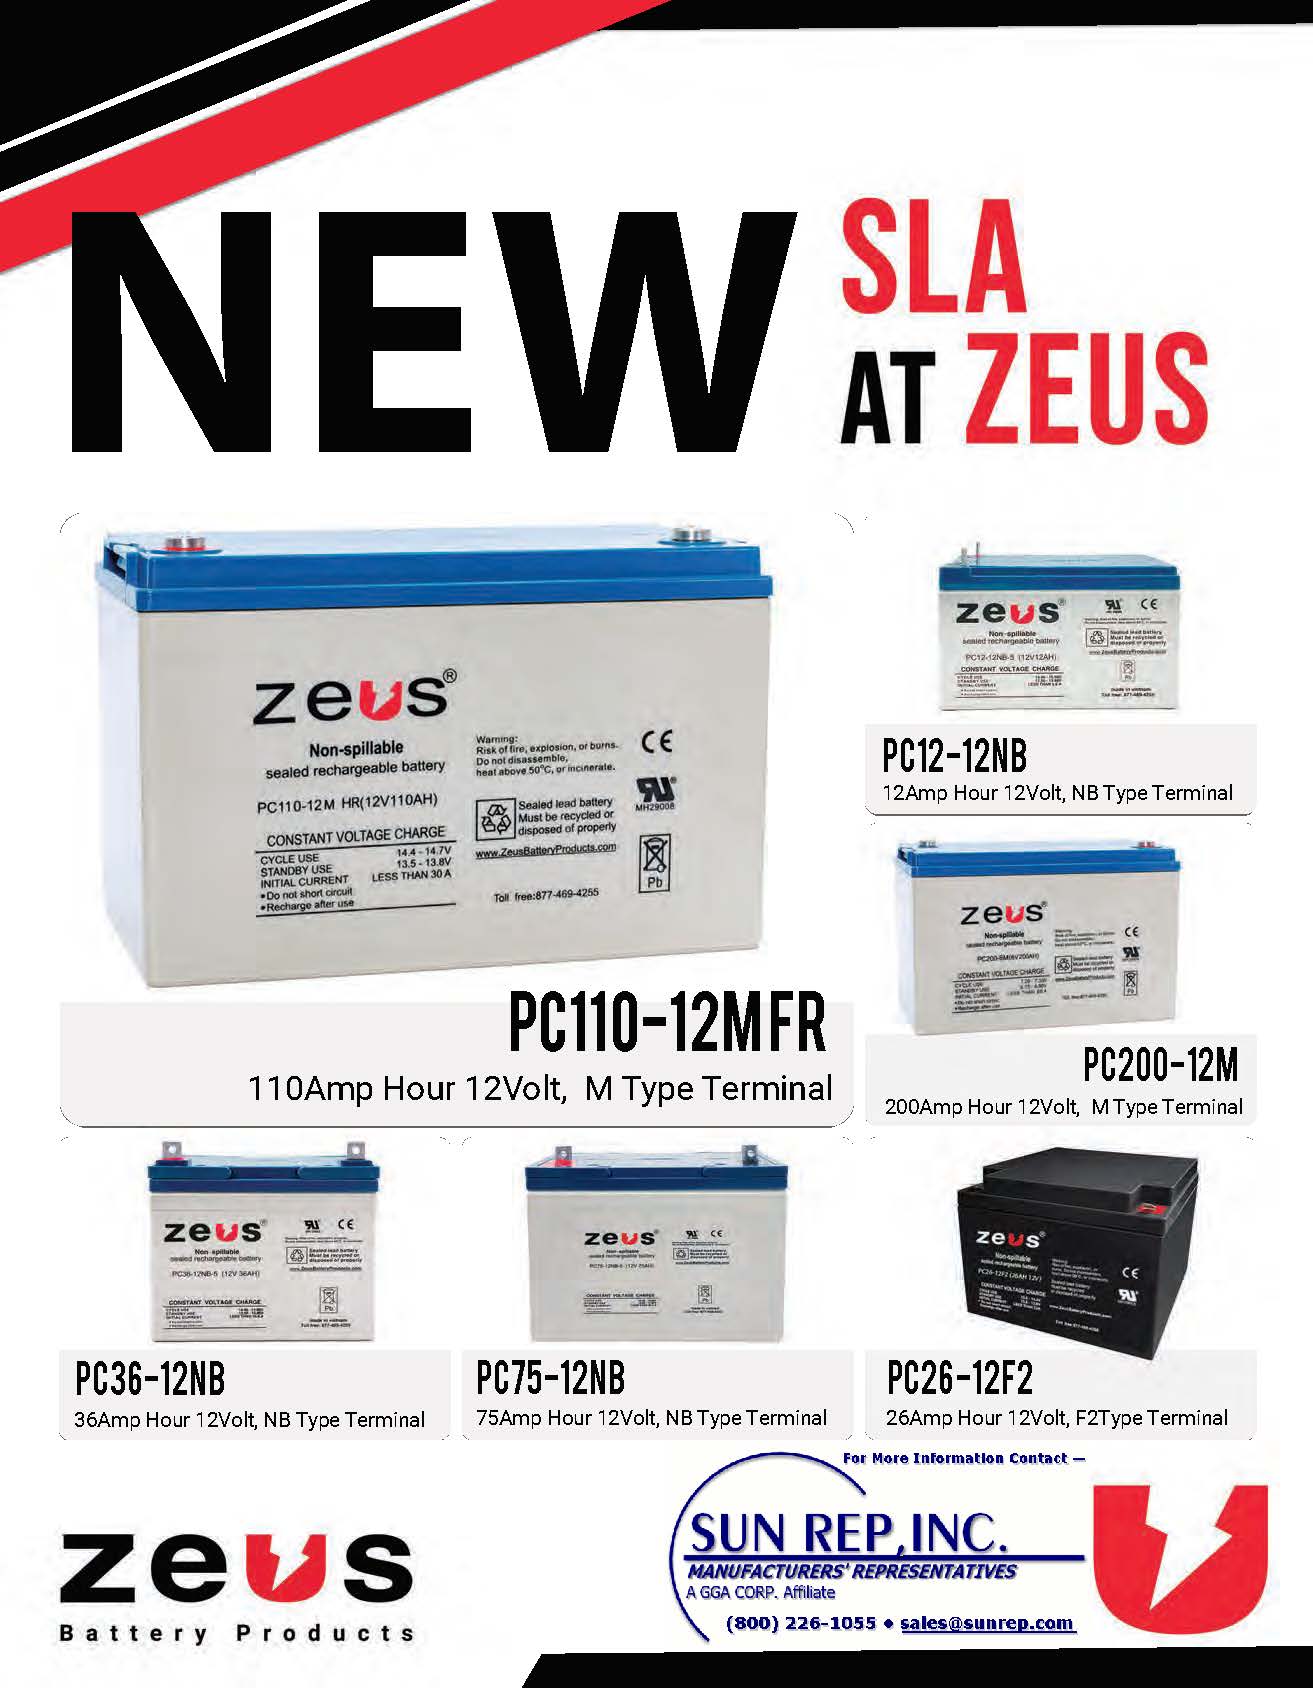 ZEUS BATTERY PRODUCTS